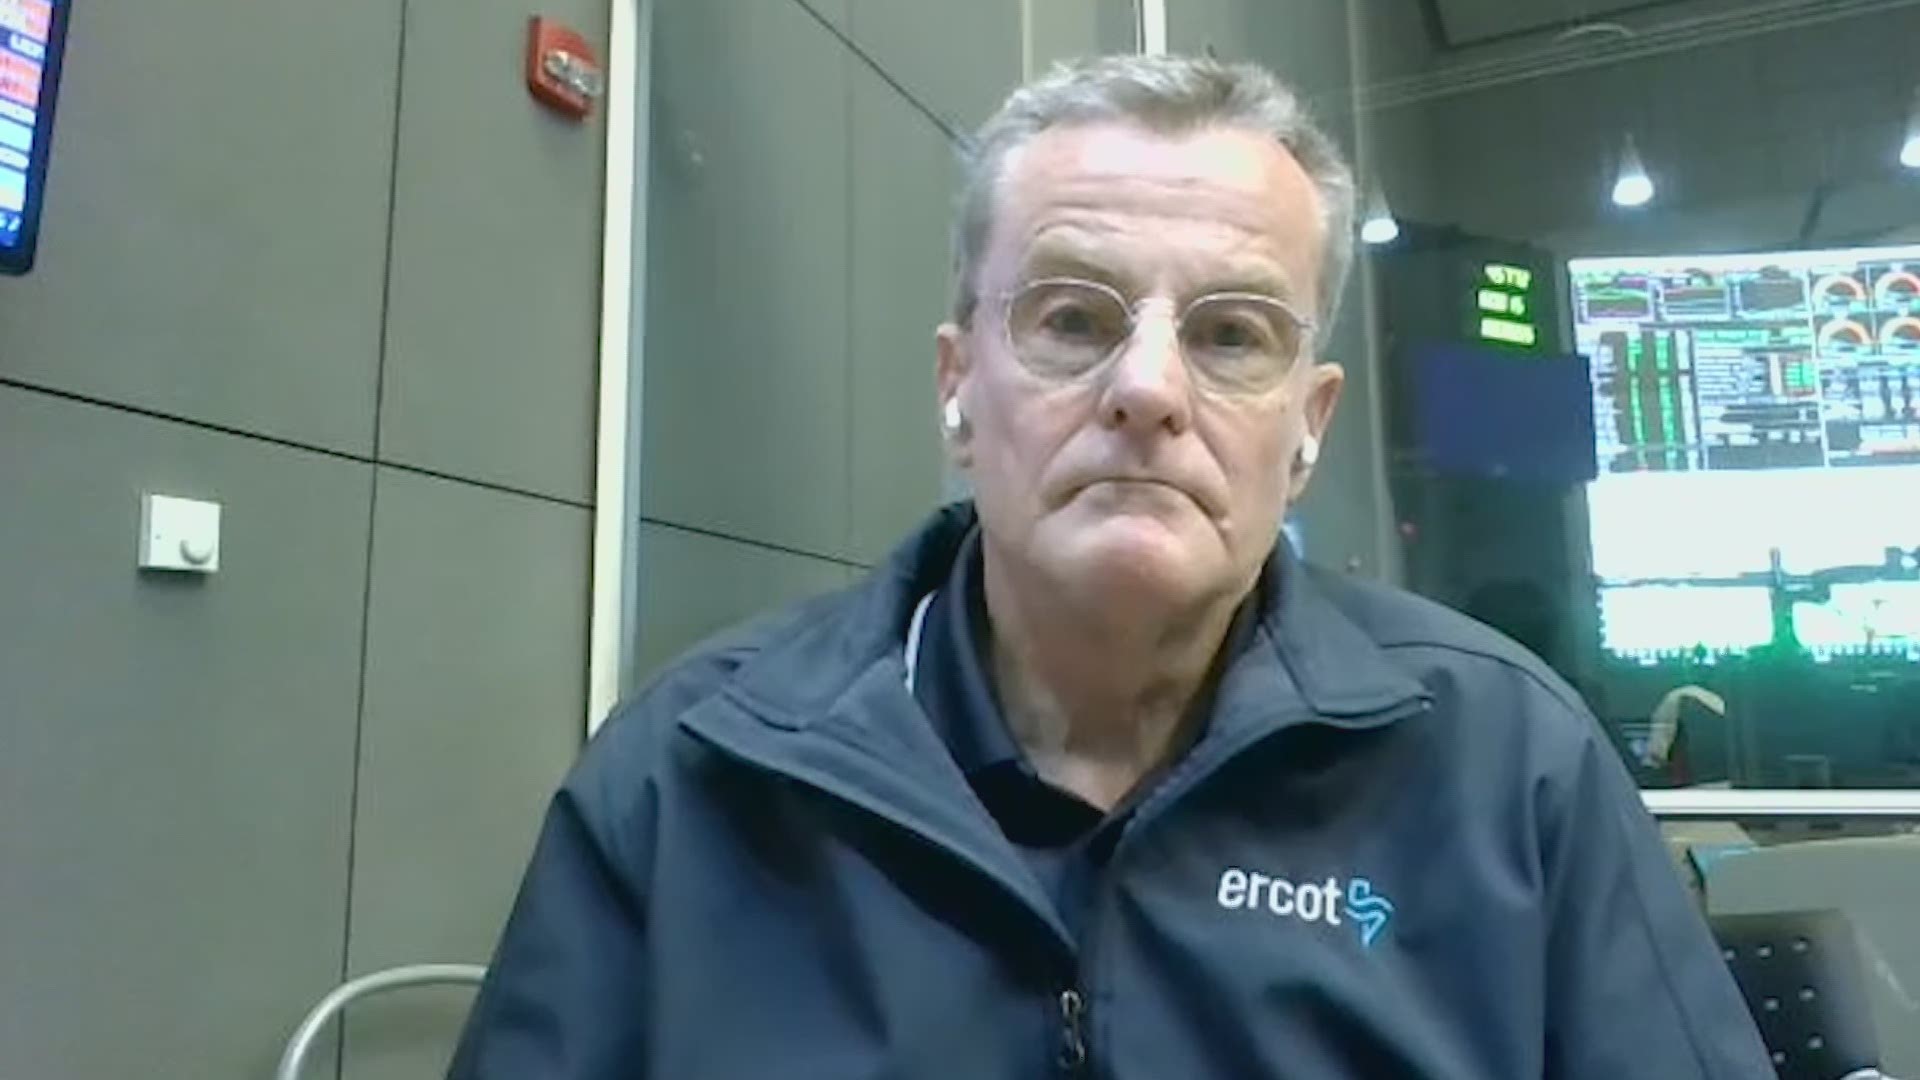 As temperatures climb later in the week, demands on the state's power grid will lessen and help recovery efforts, ERCOT CEO Bill Magness told WFAA.